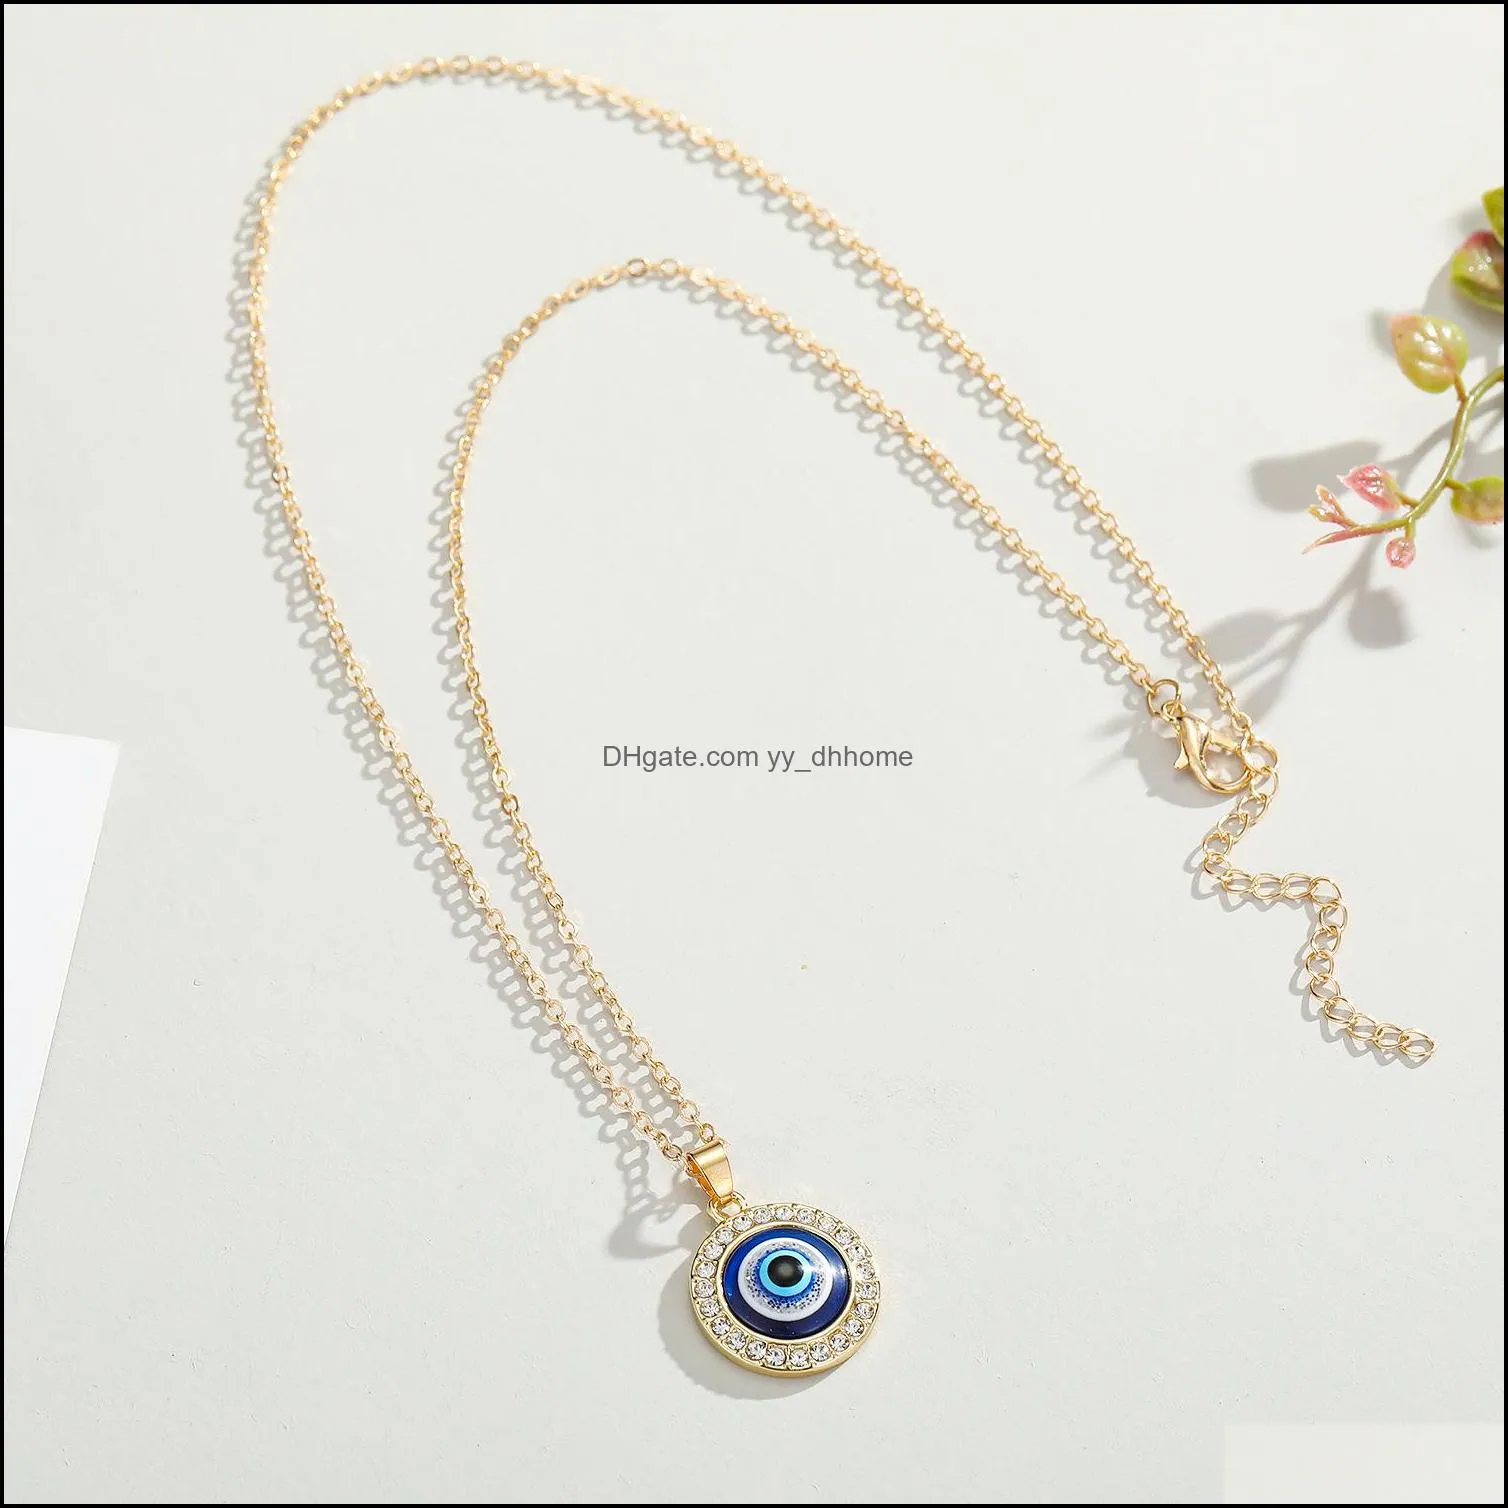 ups new jewelry turkish eye necklace dot party favor diamond round blue eye pendant necklace foreign trade sweater chain jewelry